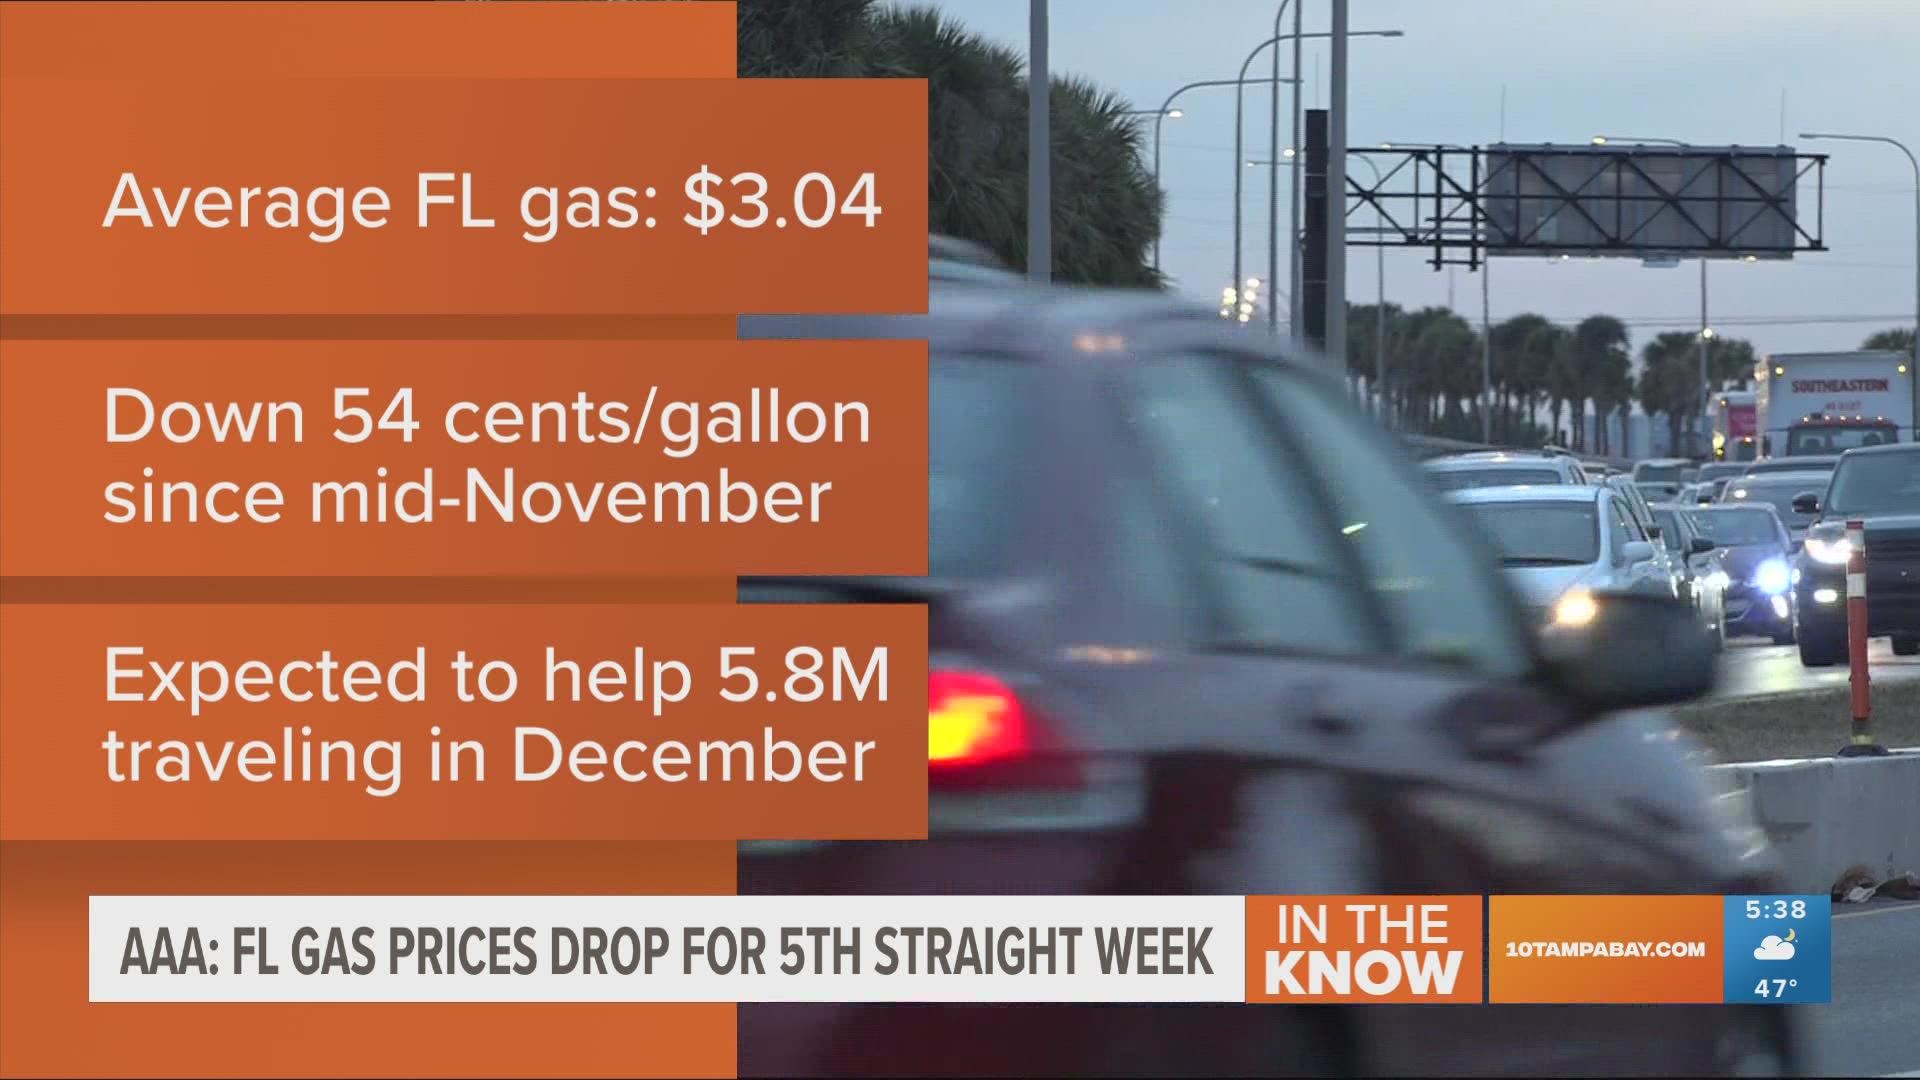 The drop in prices will help the more than 5 million Floridians expected to travel by car during the holidays.